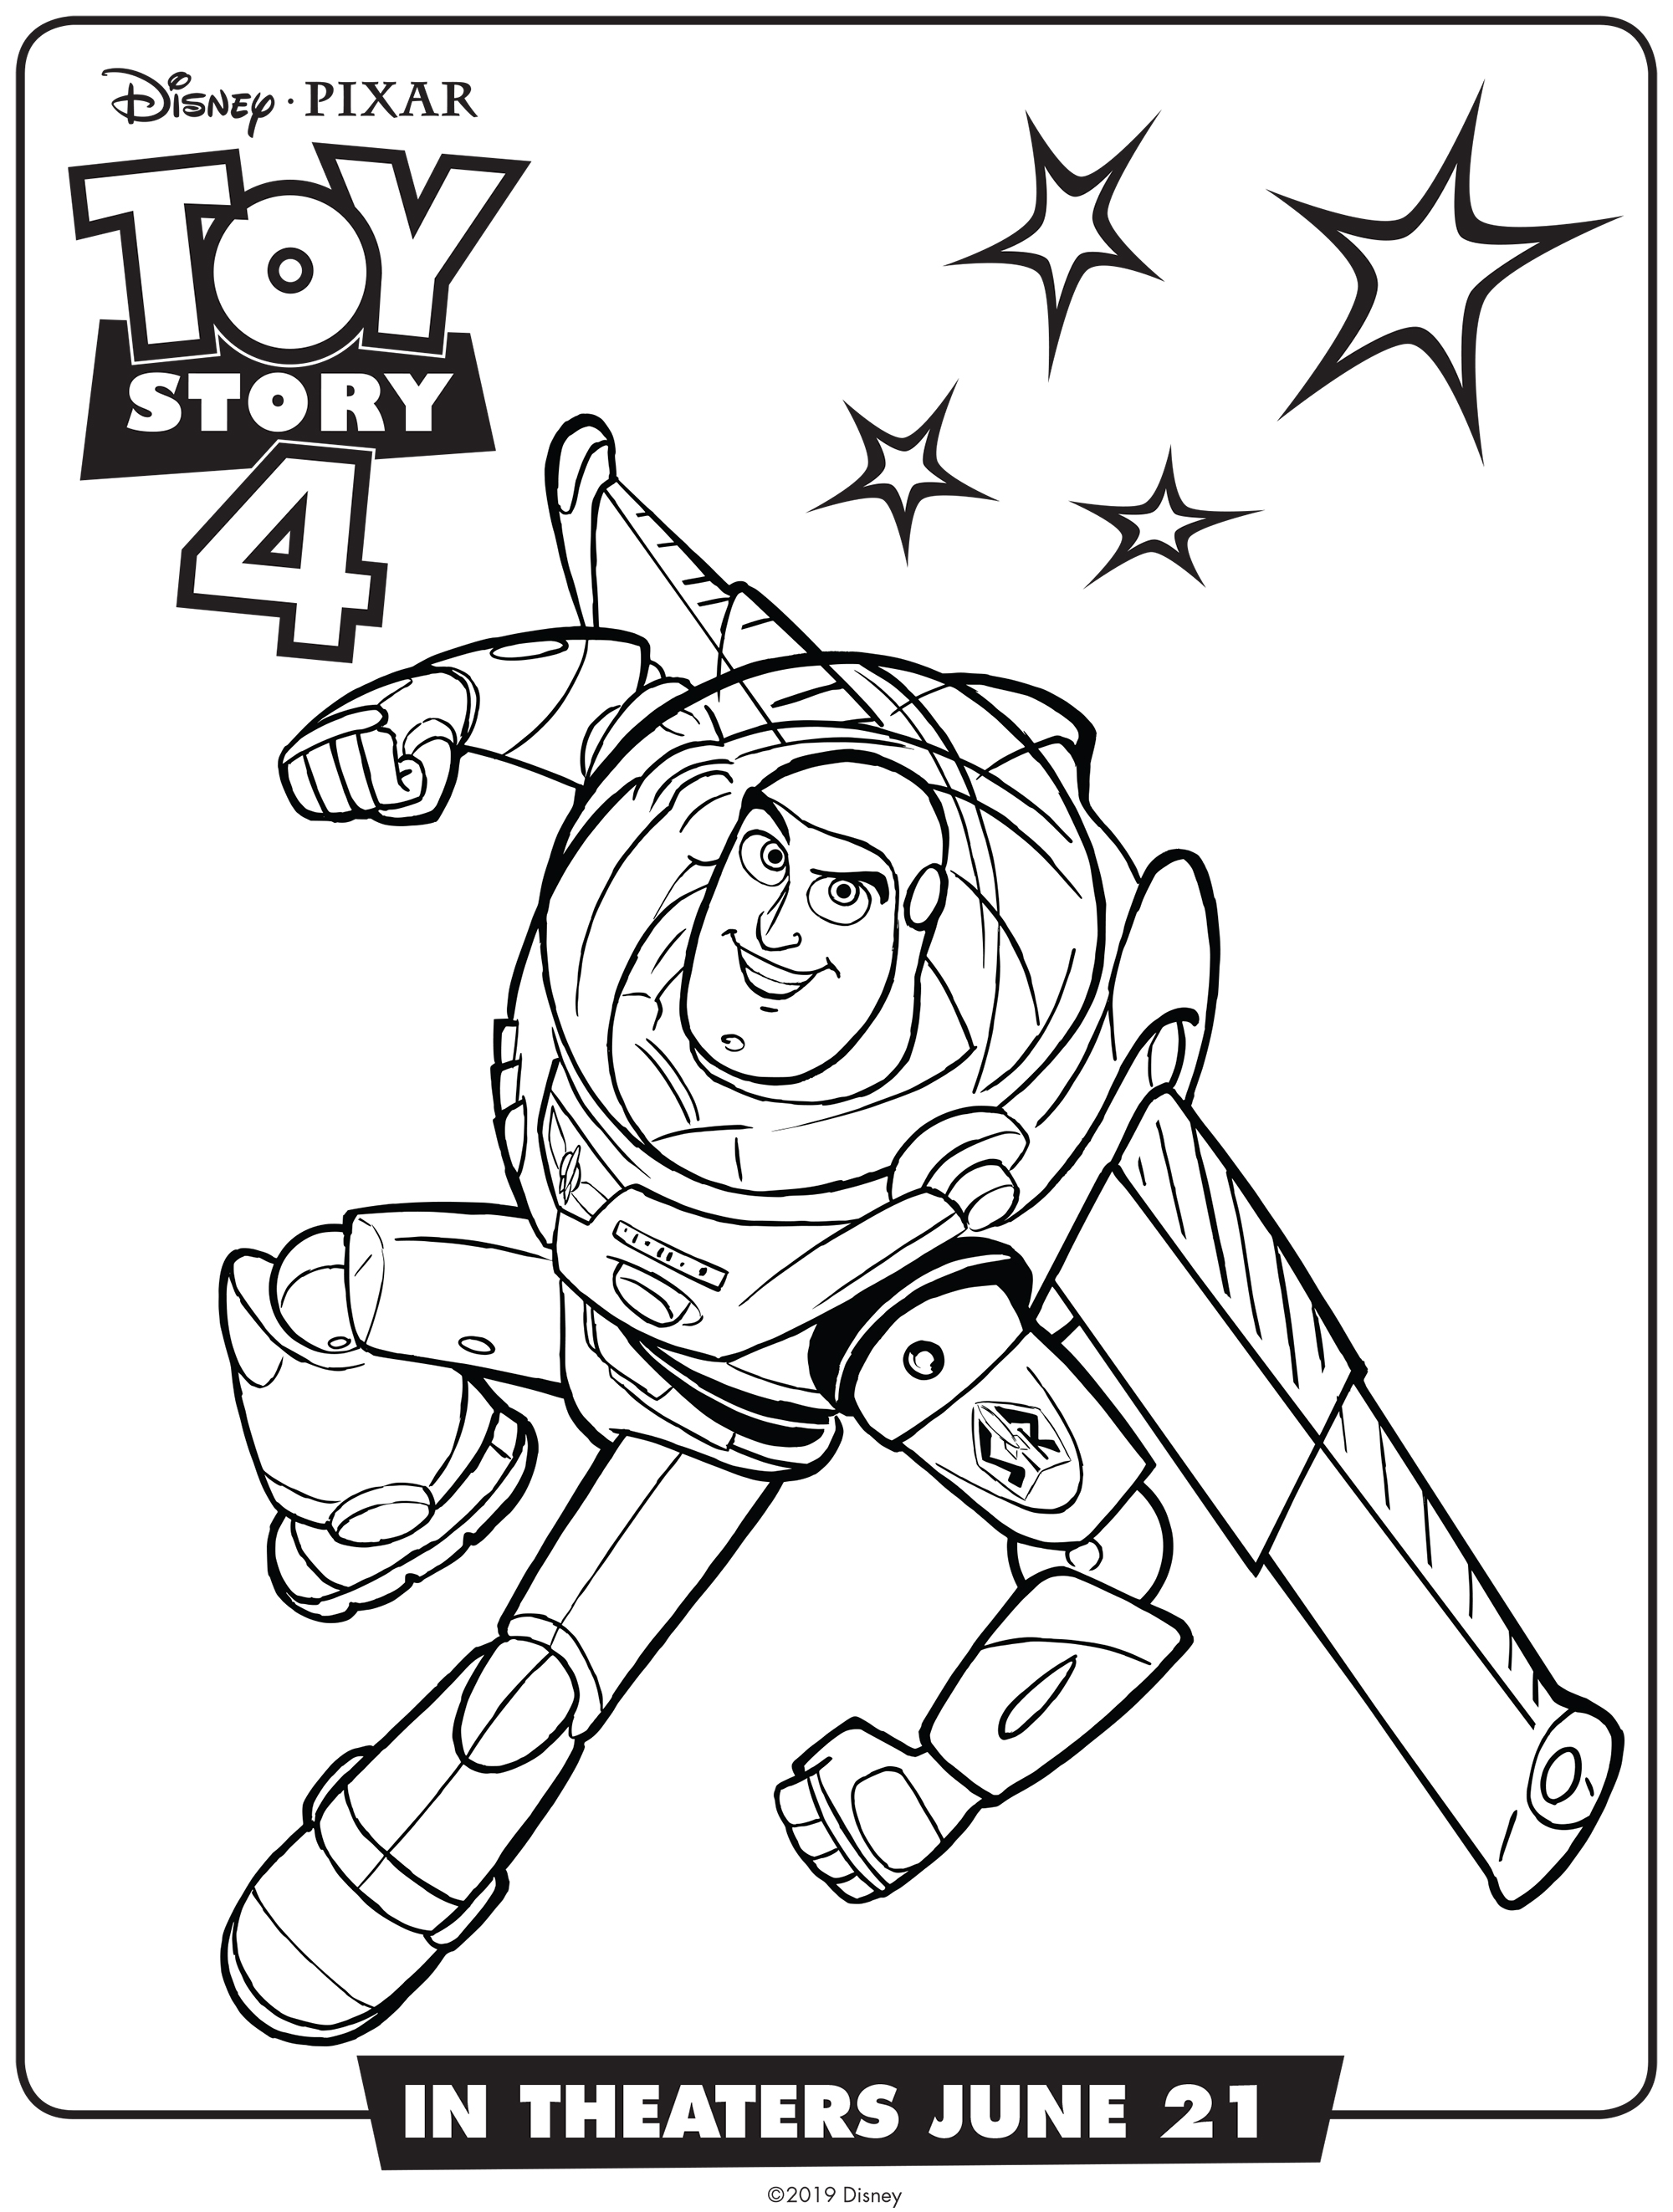 Toy Story 4 Buzz Lightyear Coloring Page